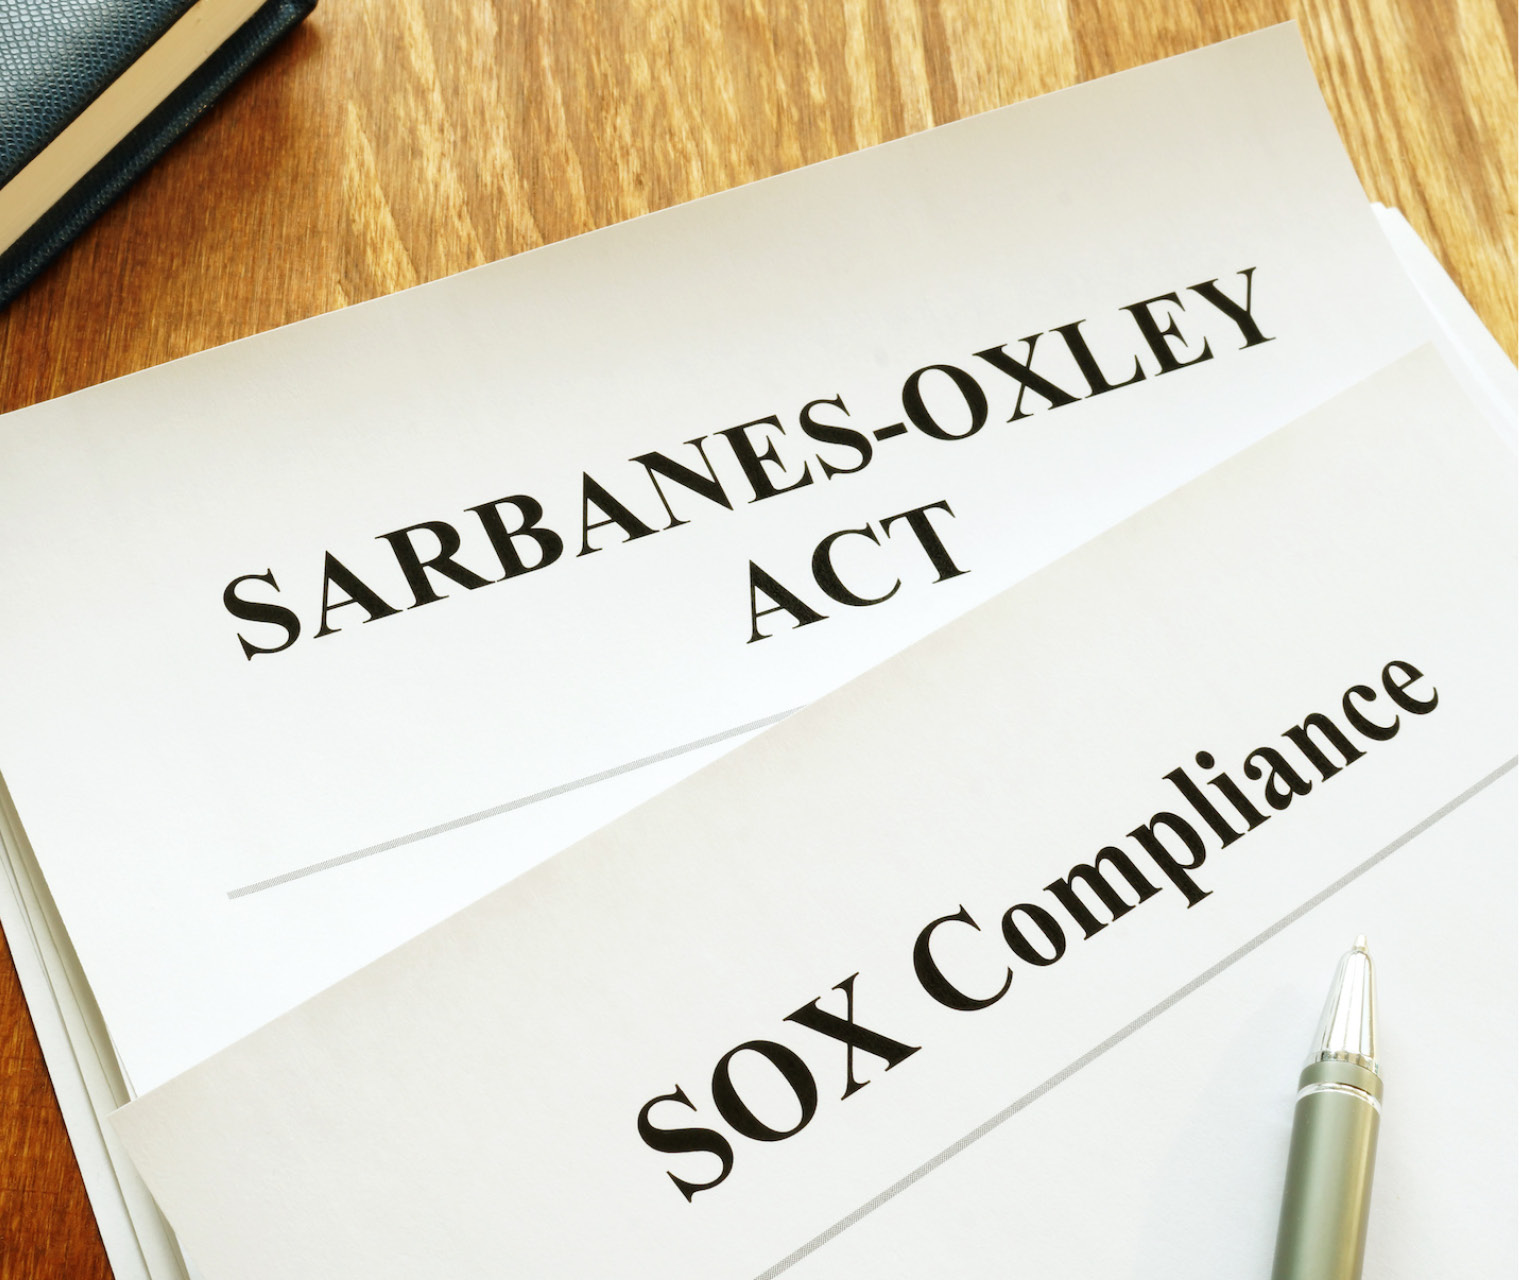 Sarbanes-Oxley Act and Sox Compliance laying on a desk. 